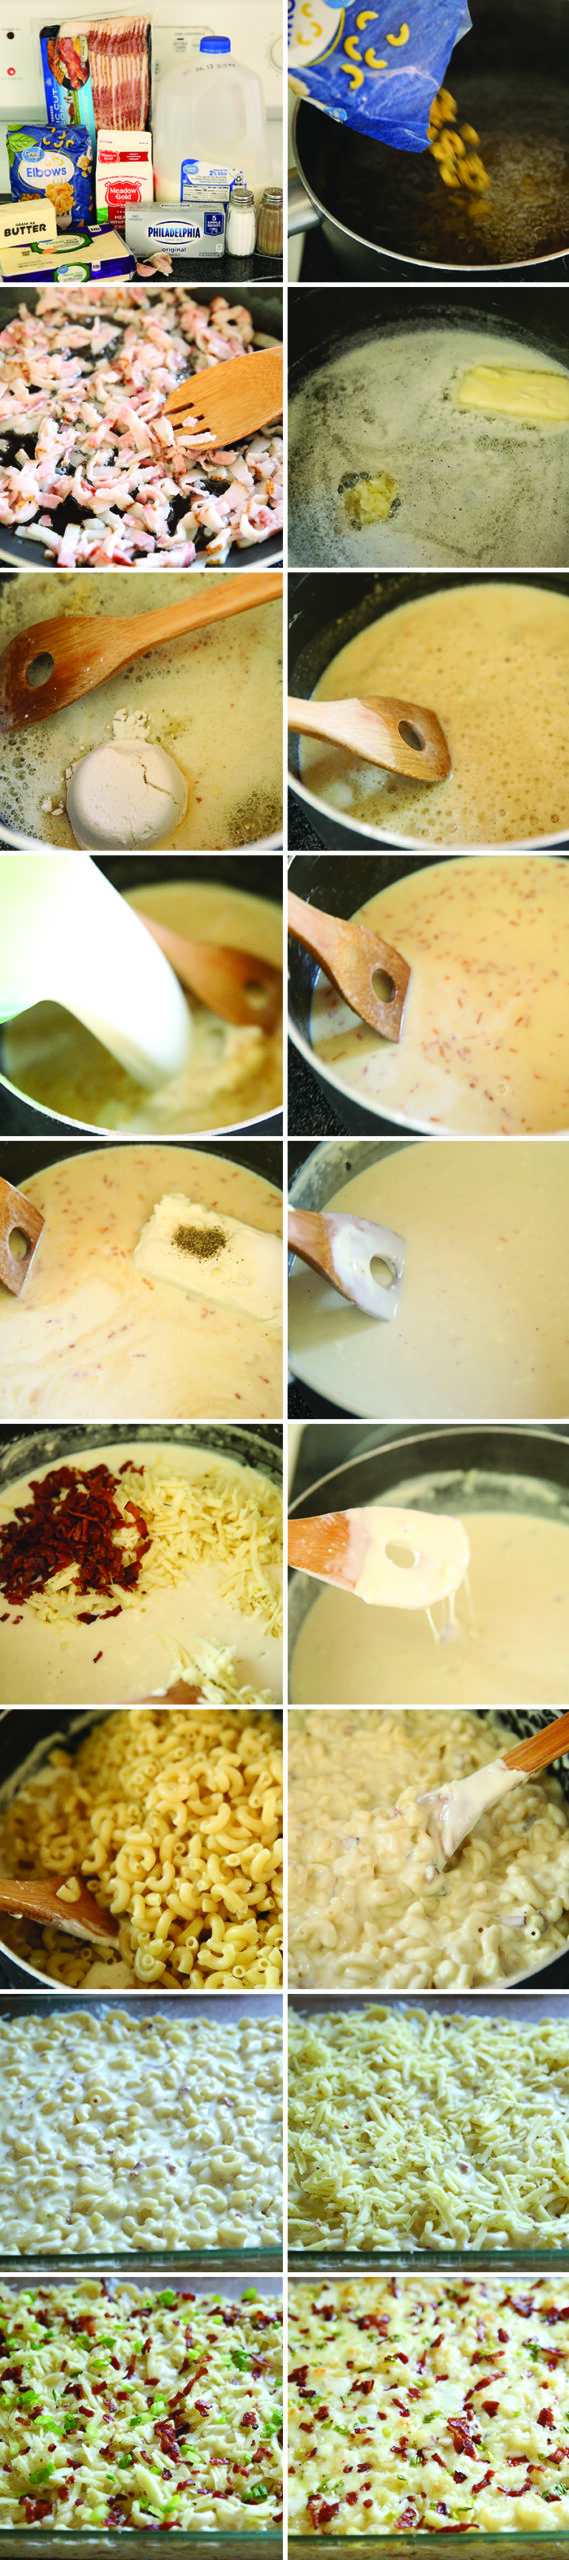 16-photo picture collage of step-by-step photos on how to make Loaded Pepper Jack Mac and Cheese.